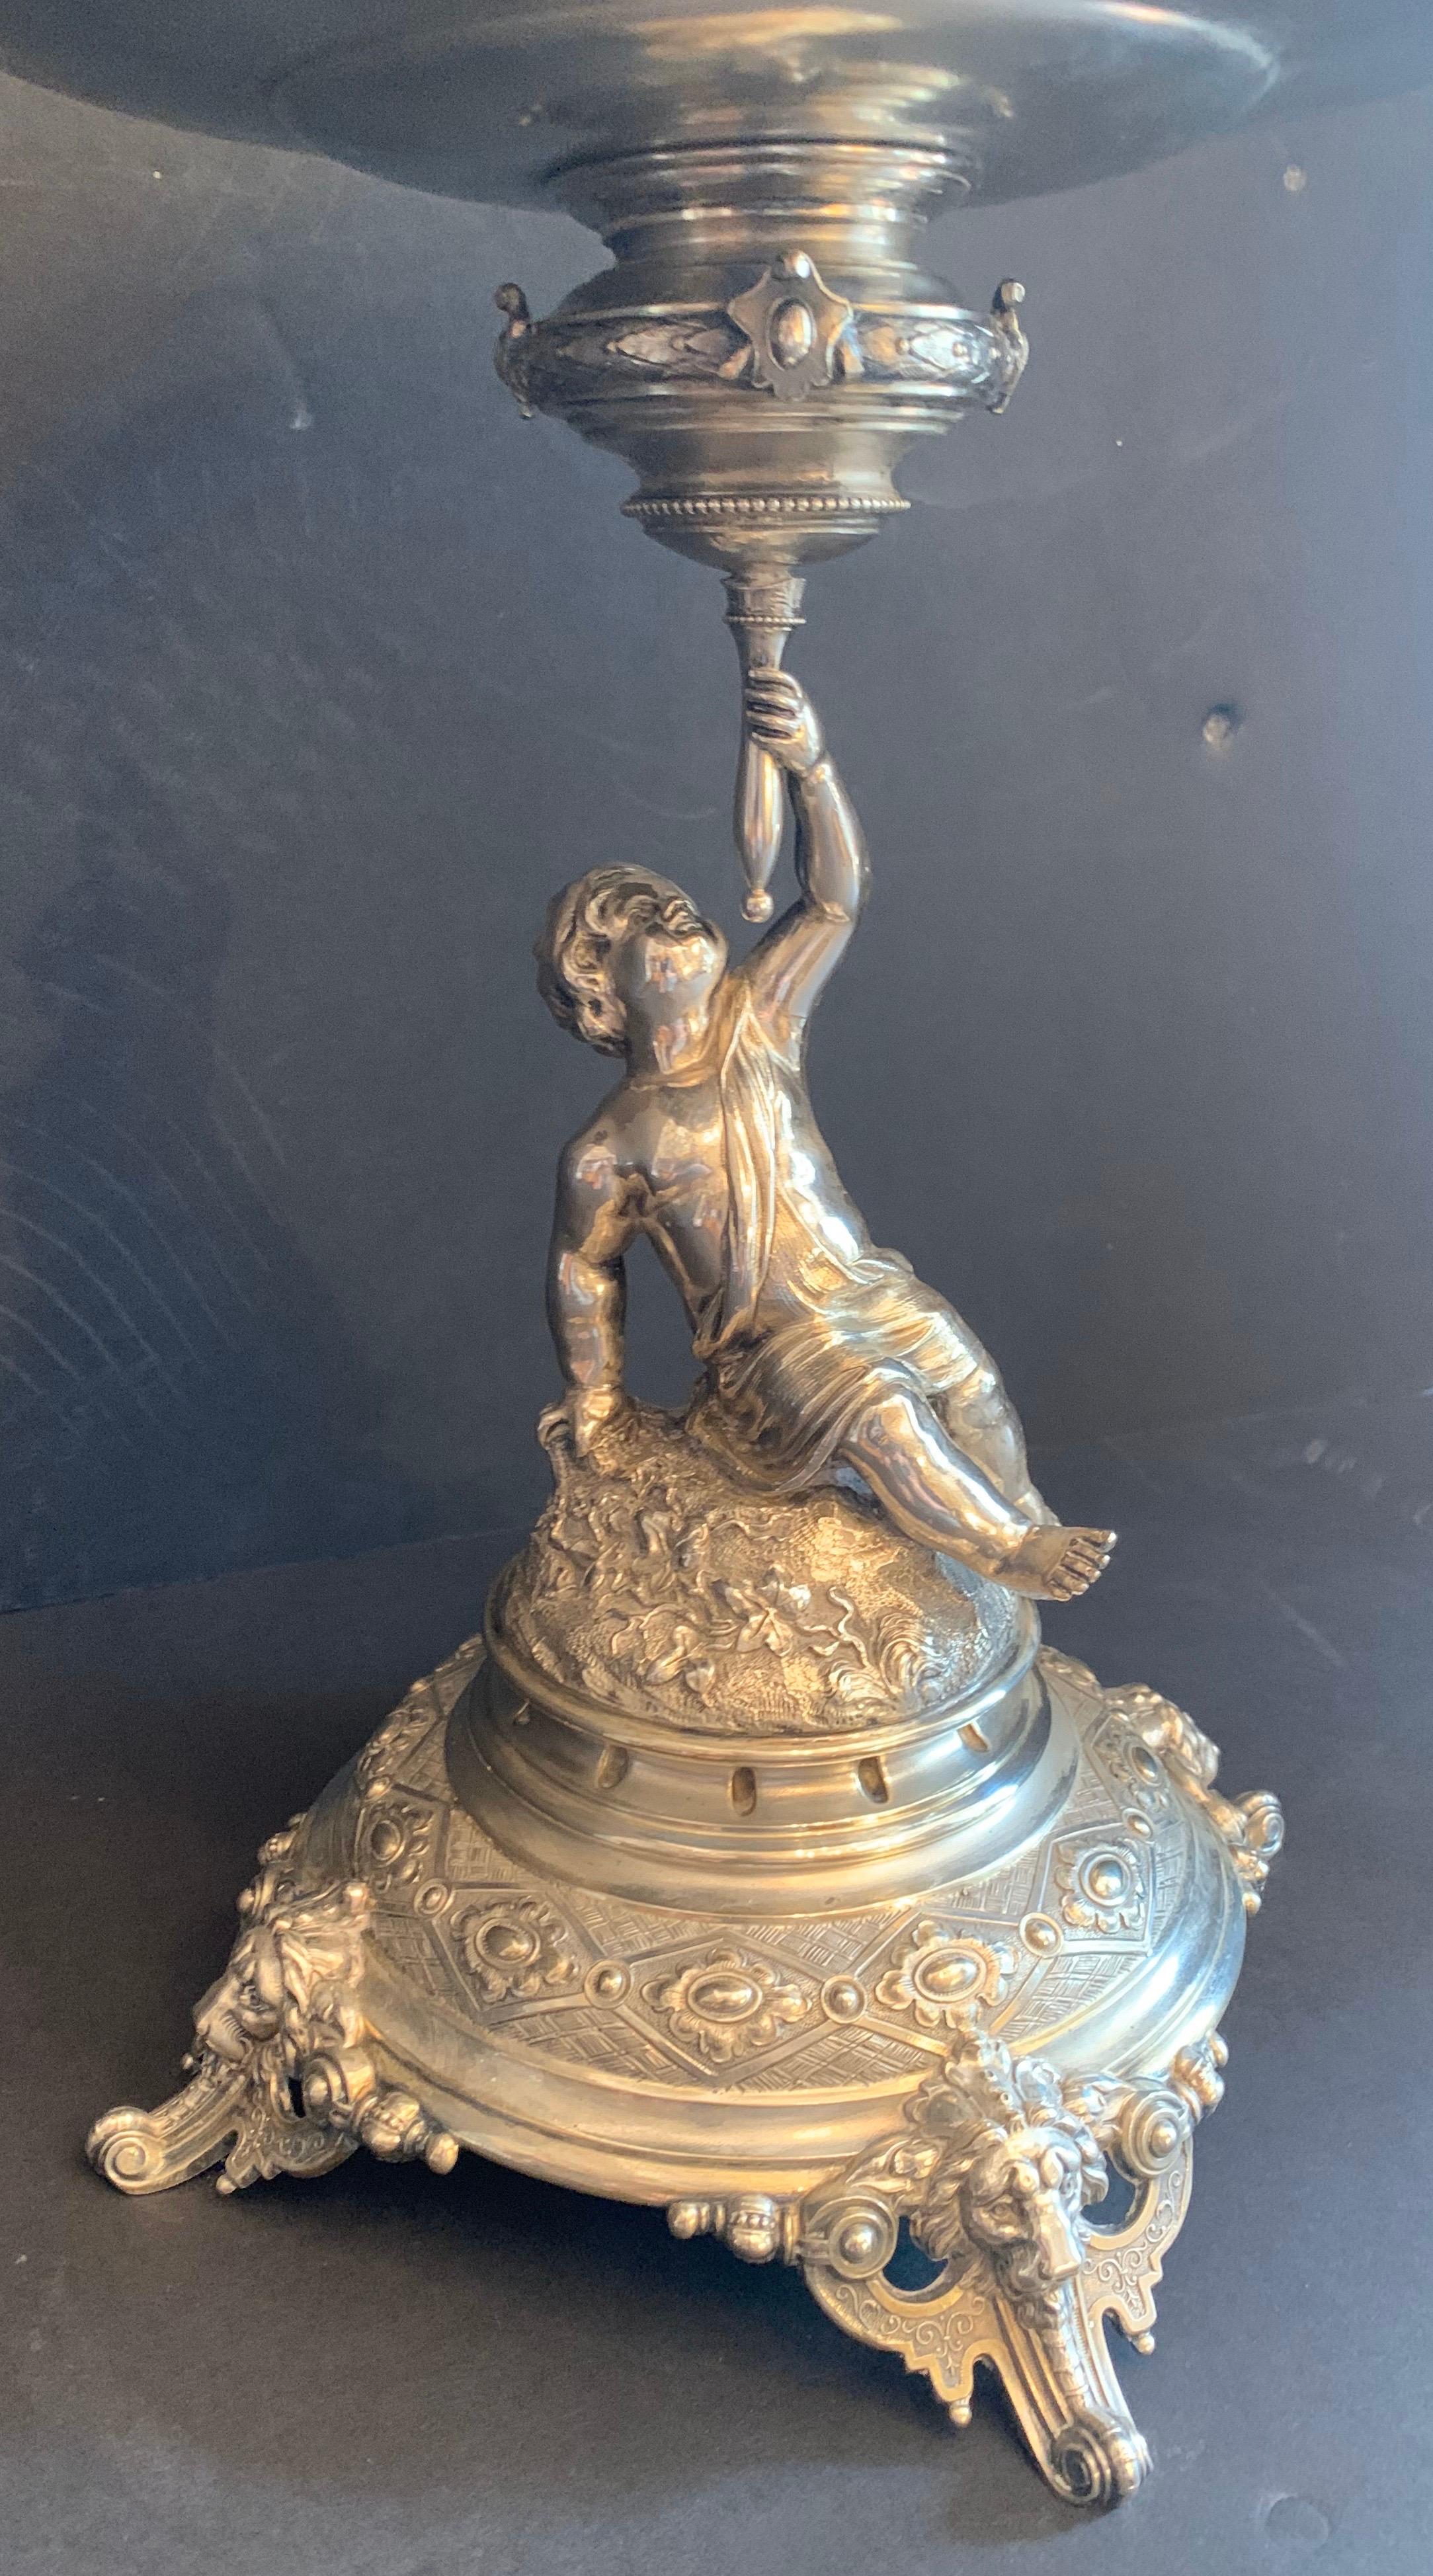 A wonderful german 800 sterling silver cherub figural centerpiece by Lazarus Posen, circa 1890
In the Rococo style, with a putti / cherub holding a filigree wreath swag and bow center bowl inset with a silver plated liner, below the cupid standing